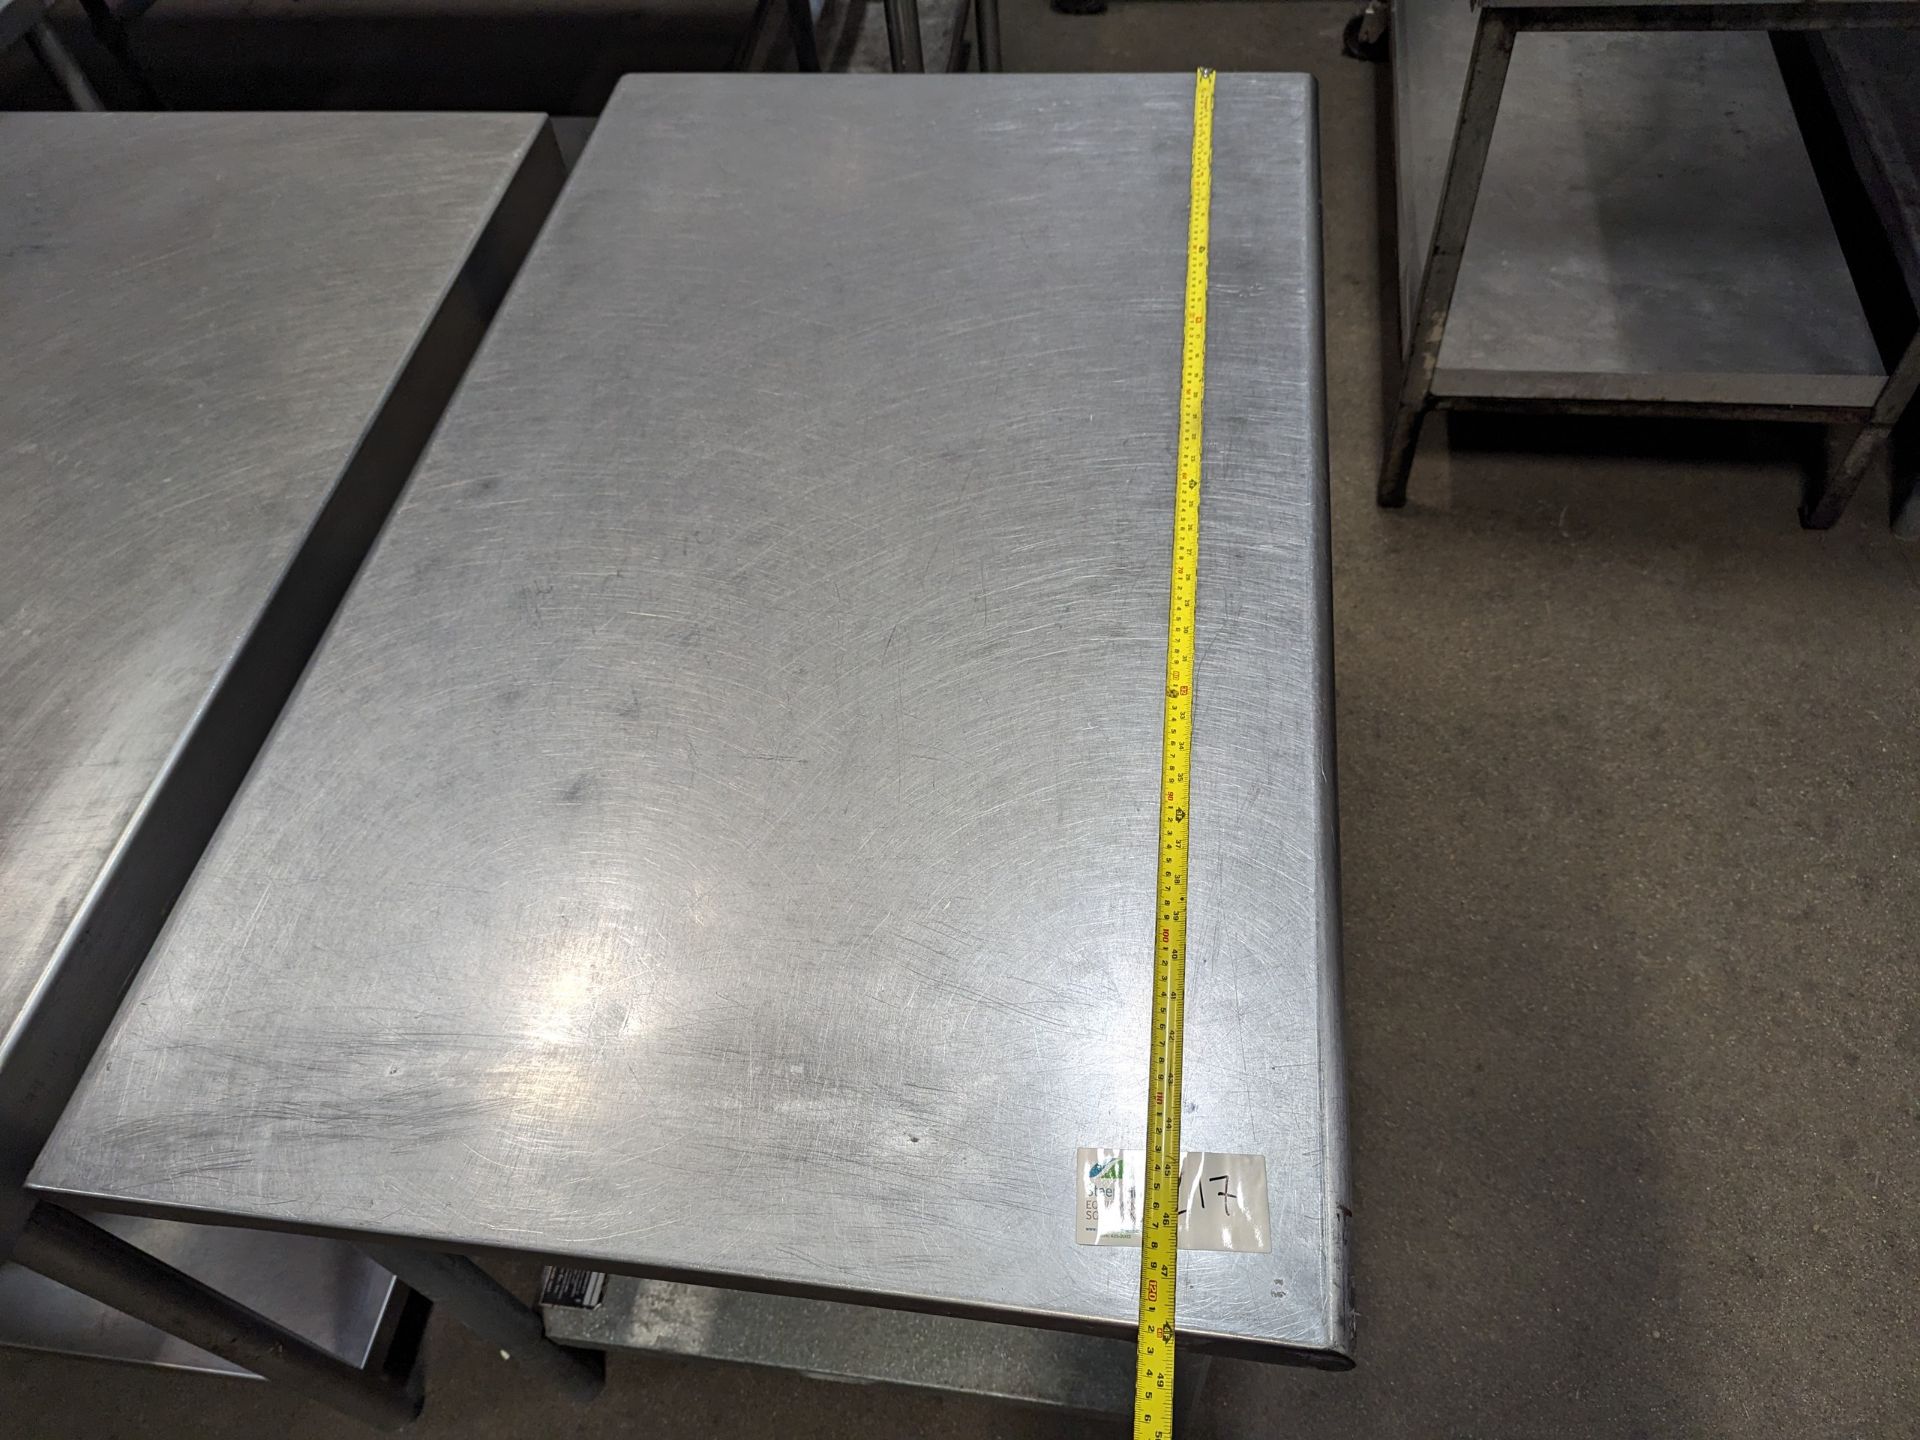 Lot of 2 4ft Long SS Tables, Dimensions LxWxH: 48x30x34 each - Image 3 of 7